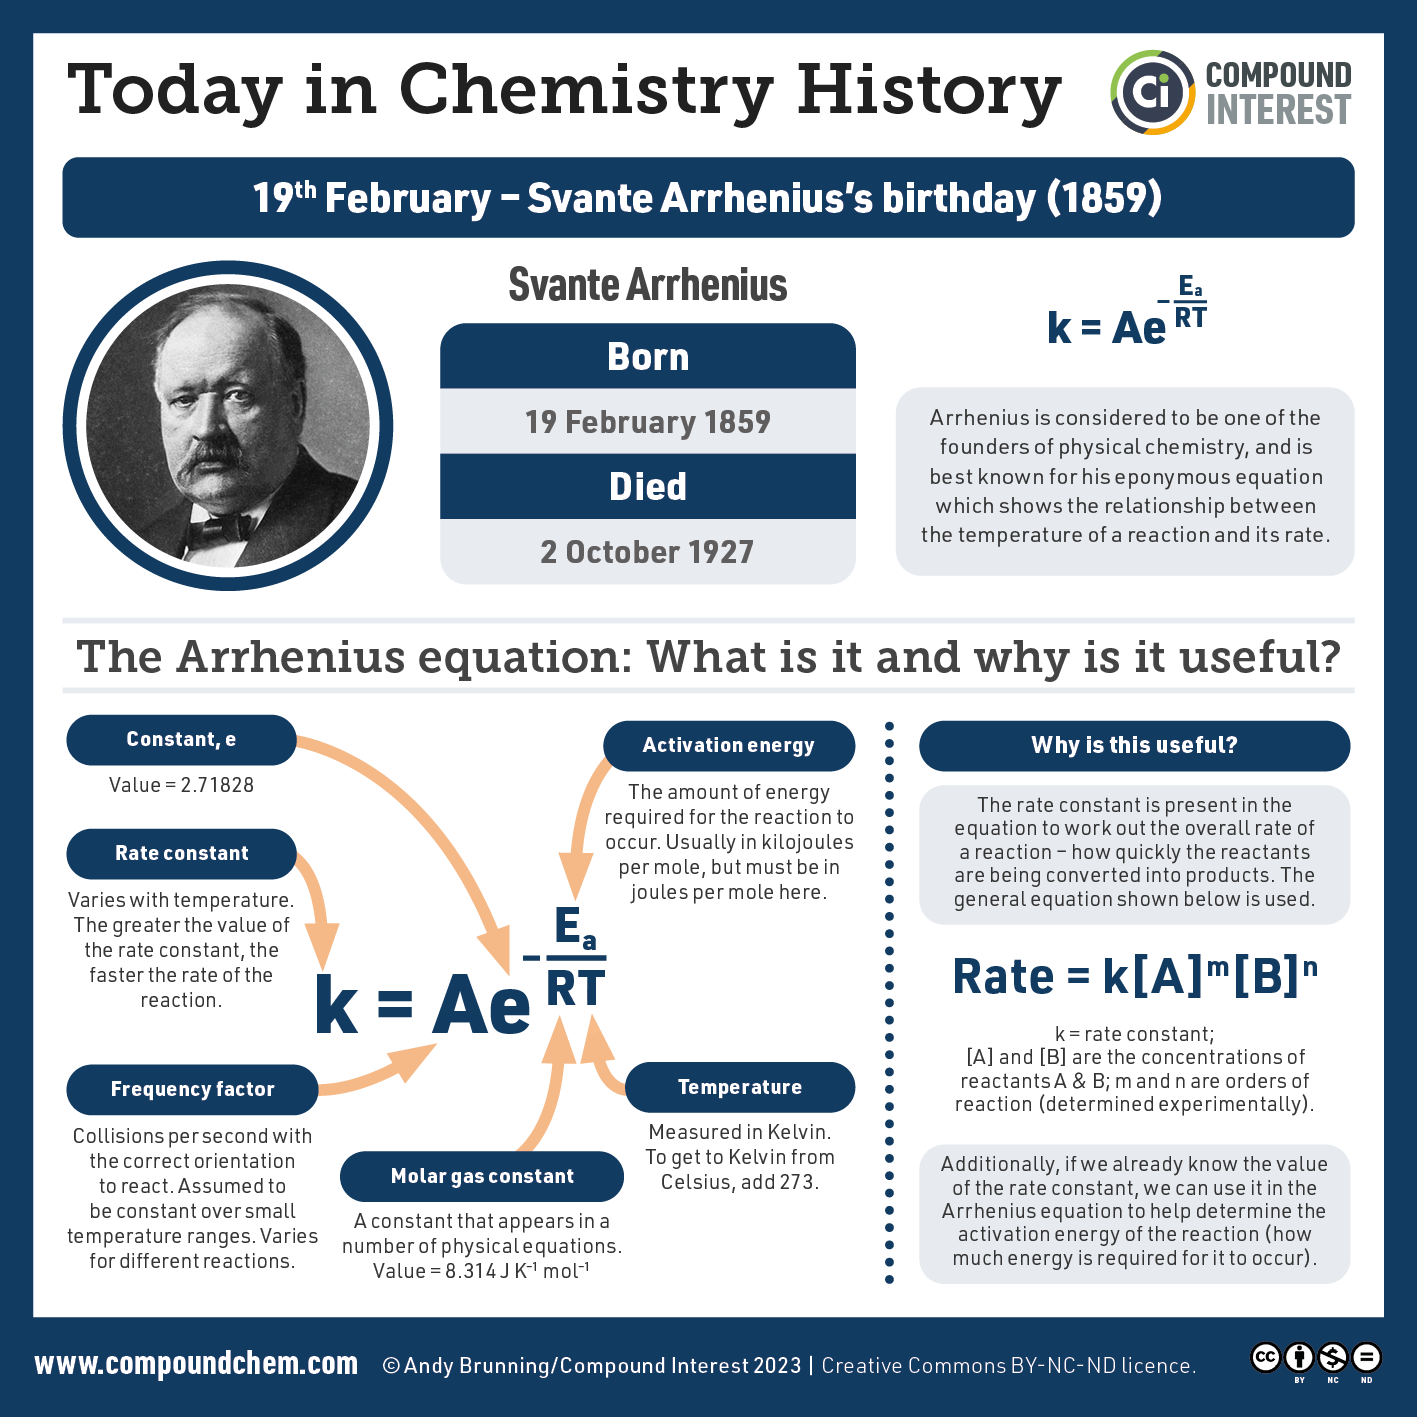 Today in Chemistry History infographic on Svante Arrhenius, highlighting his work on the Arrhenius equation which shows the relationship between the temperature of a chemical reaction and its rate. The equation is shown and its various elements defined.